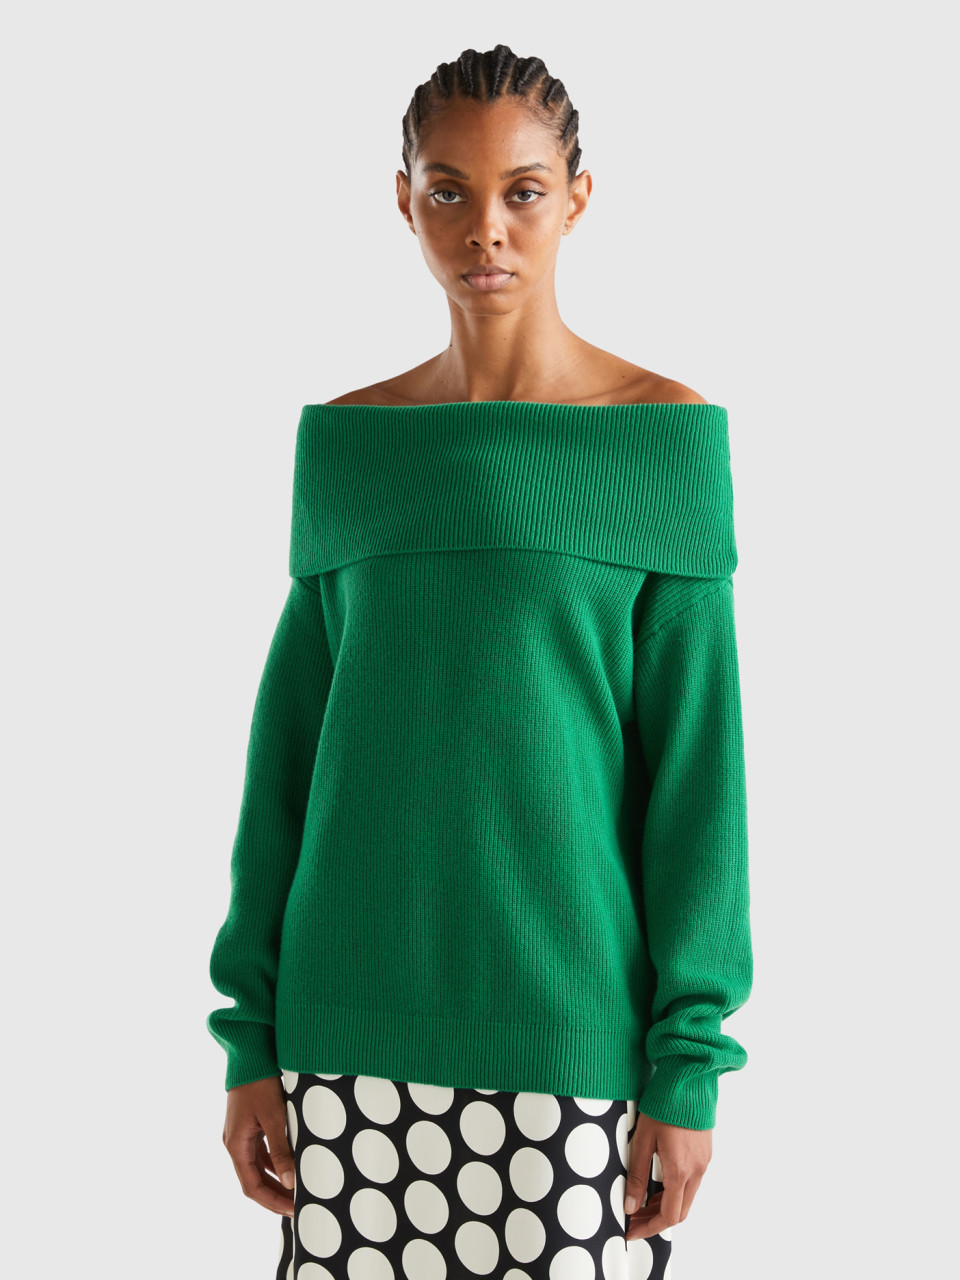 Benetton, Sweater With Bare Shoulders, Green, Women